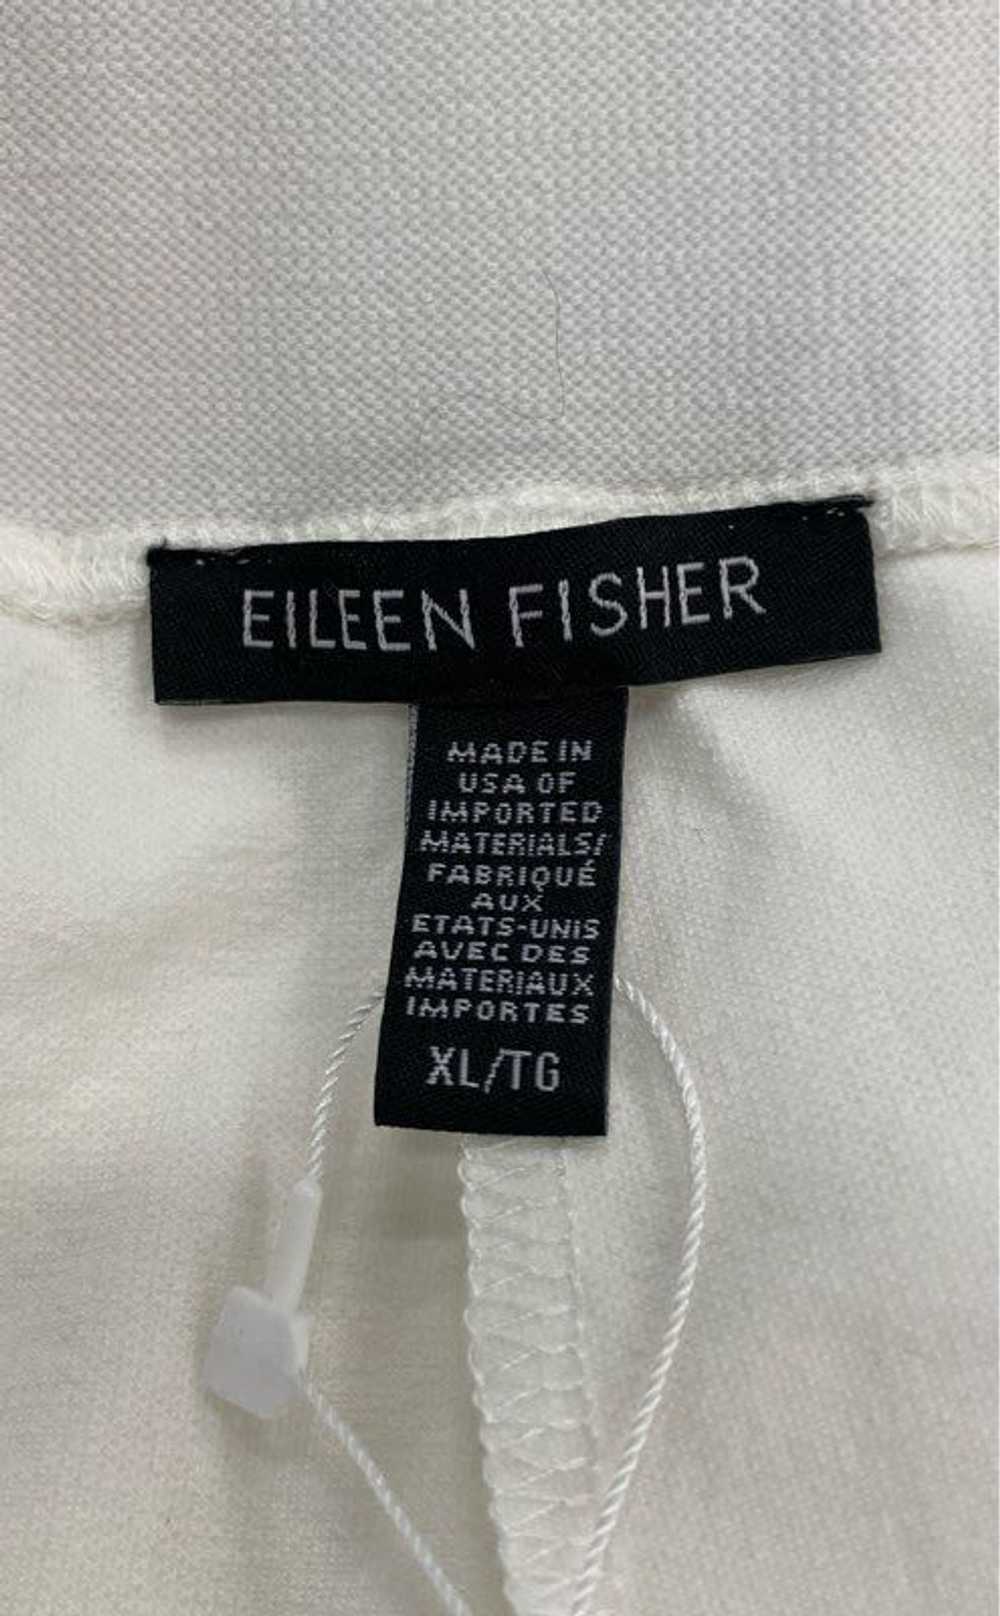 Eileen Fisher White Pants - Size X Large - image 3